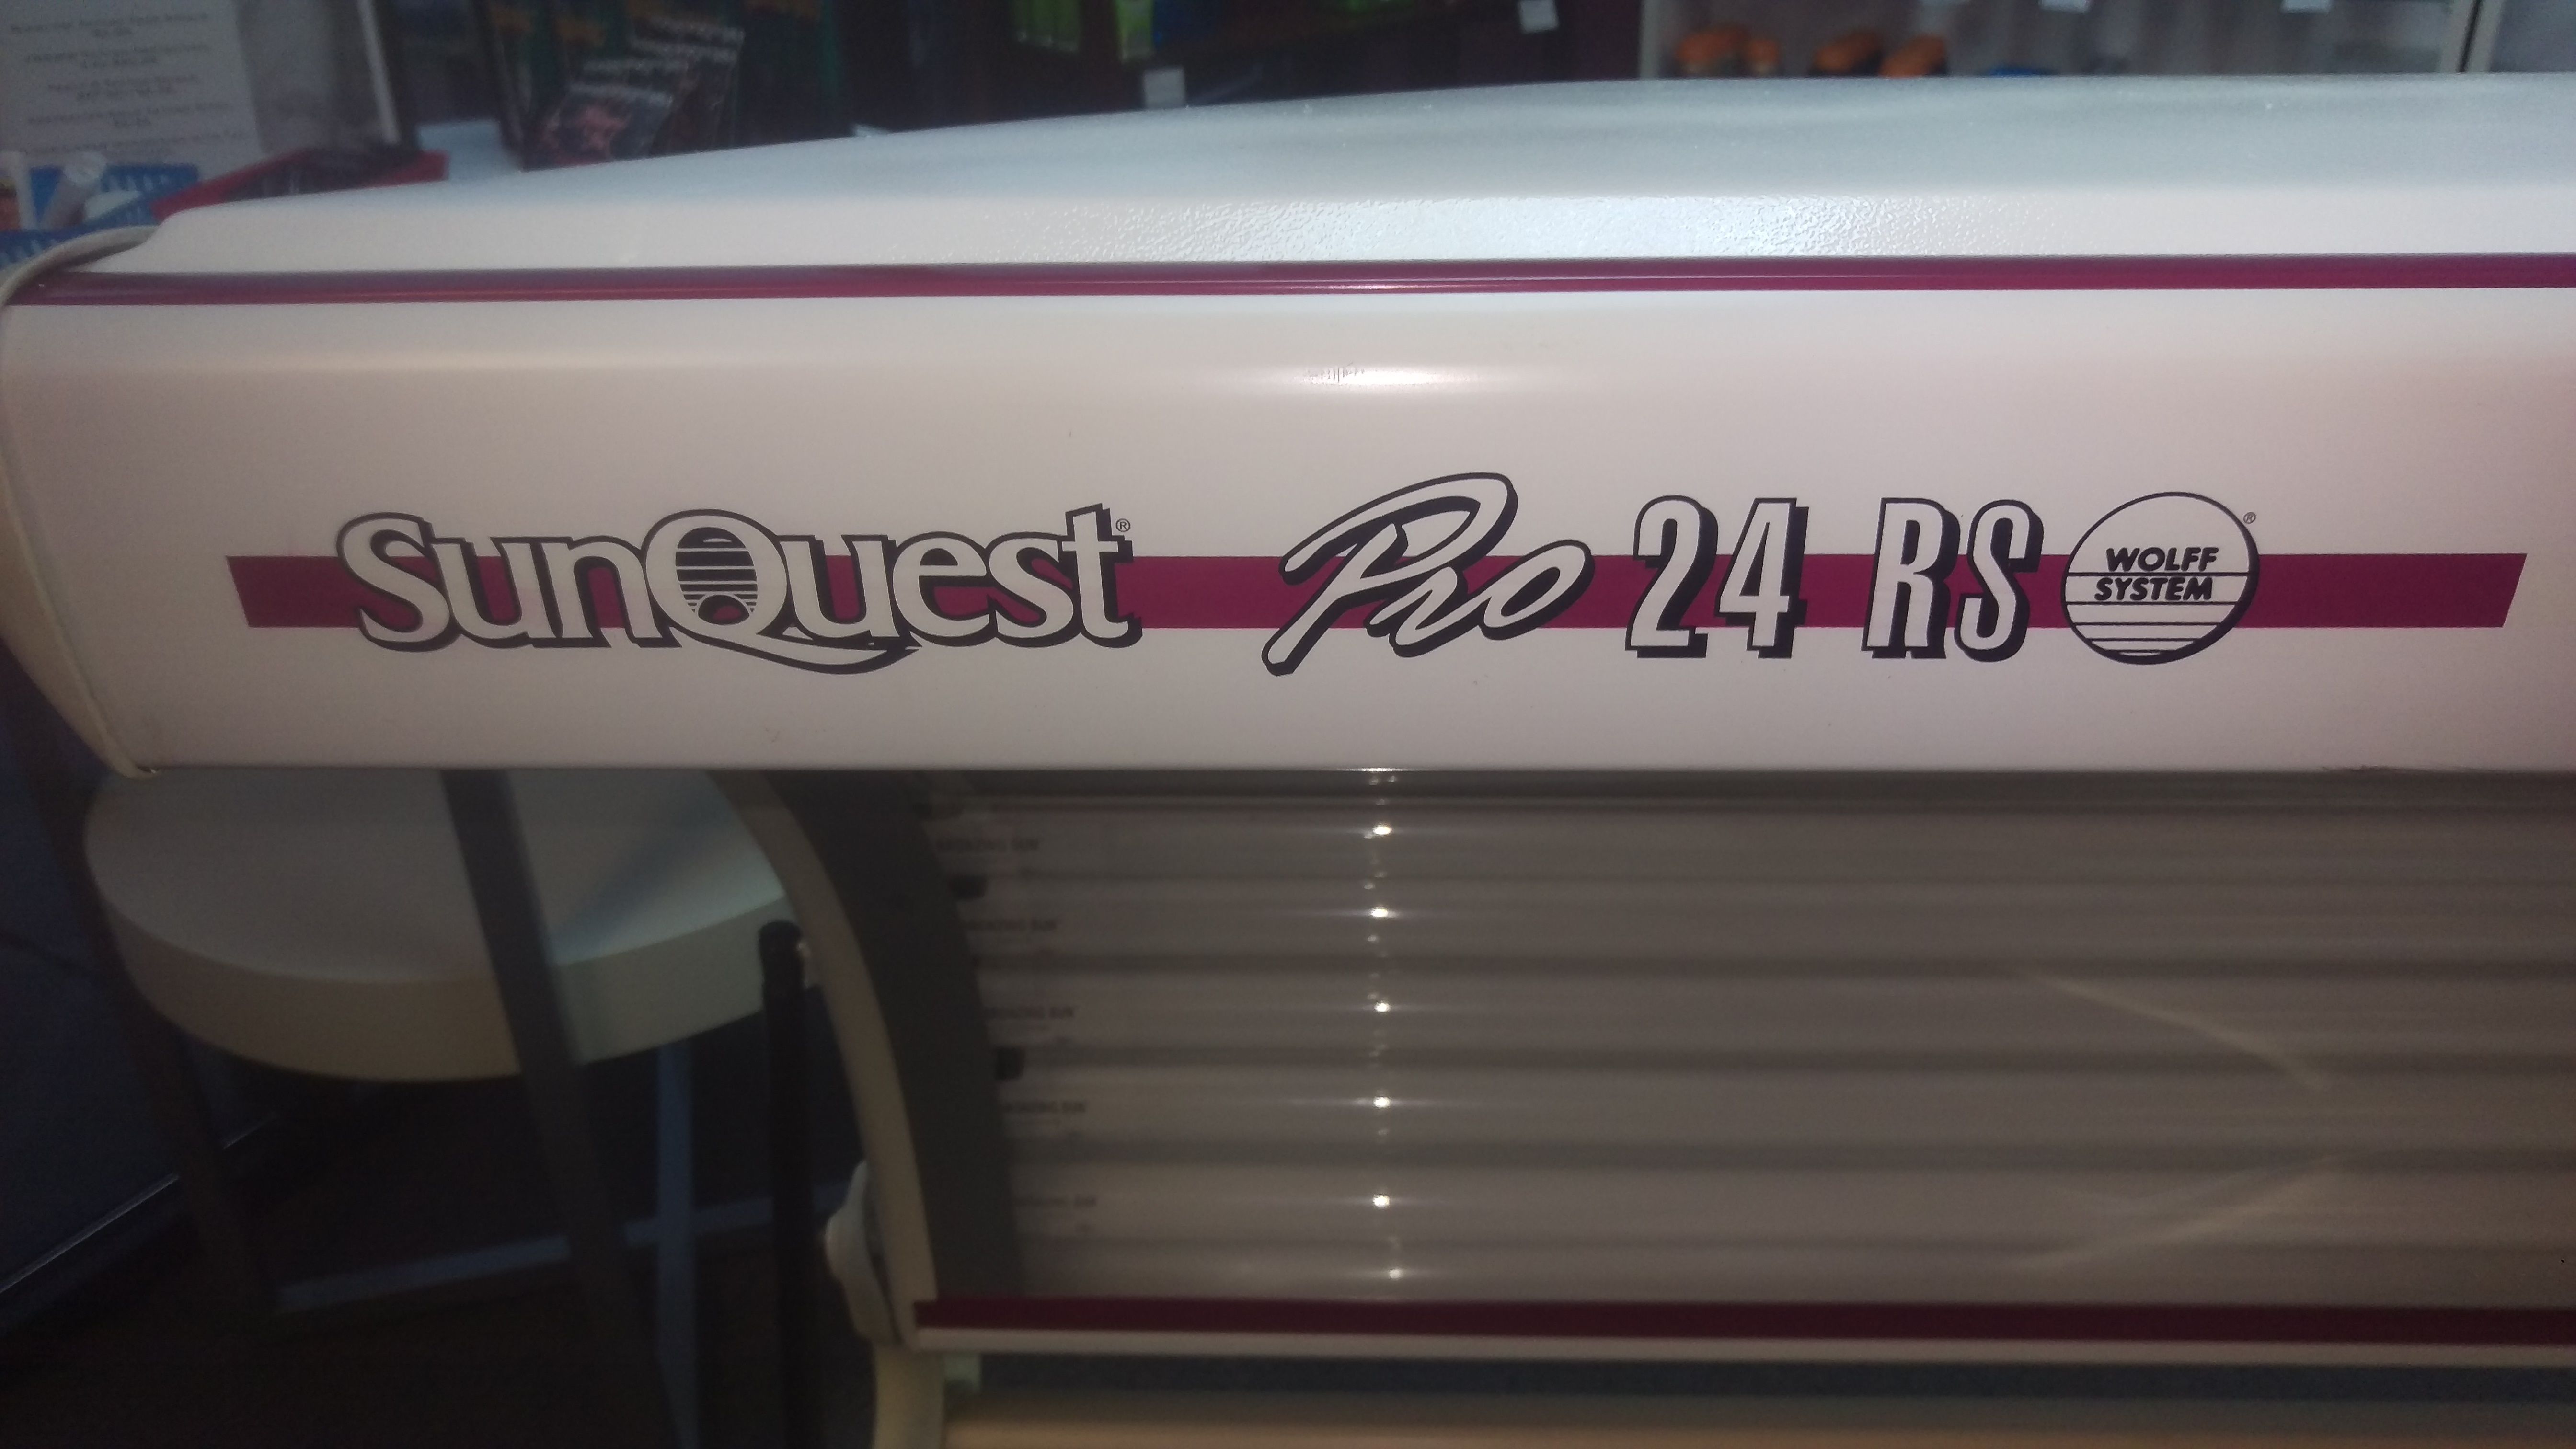 wolff sunquest tanning bed